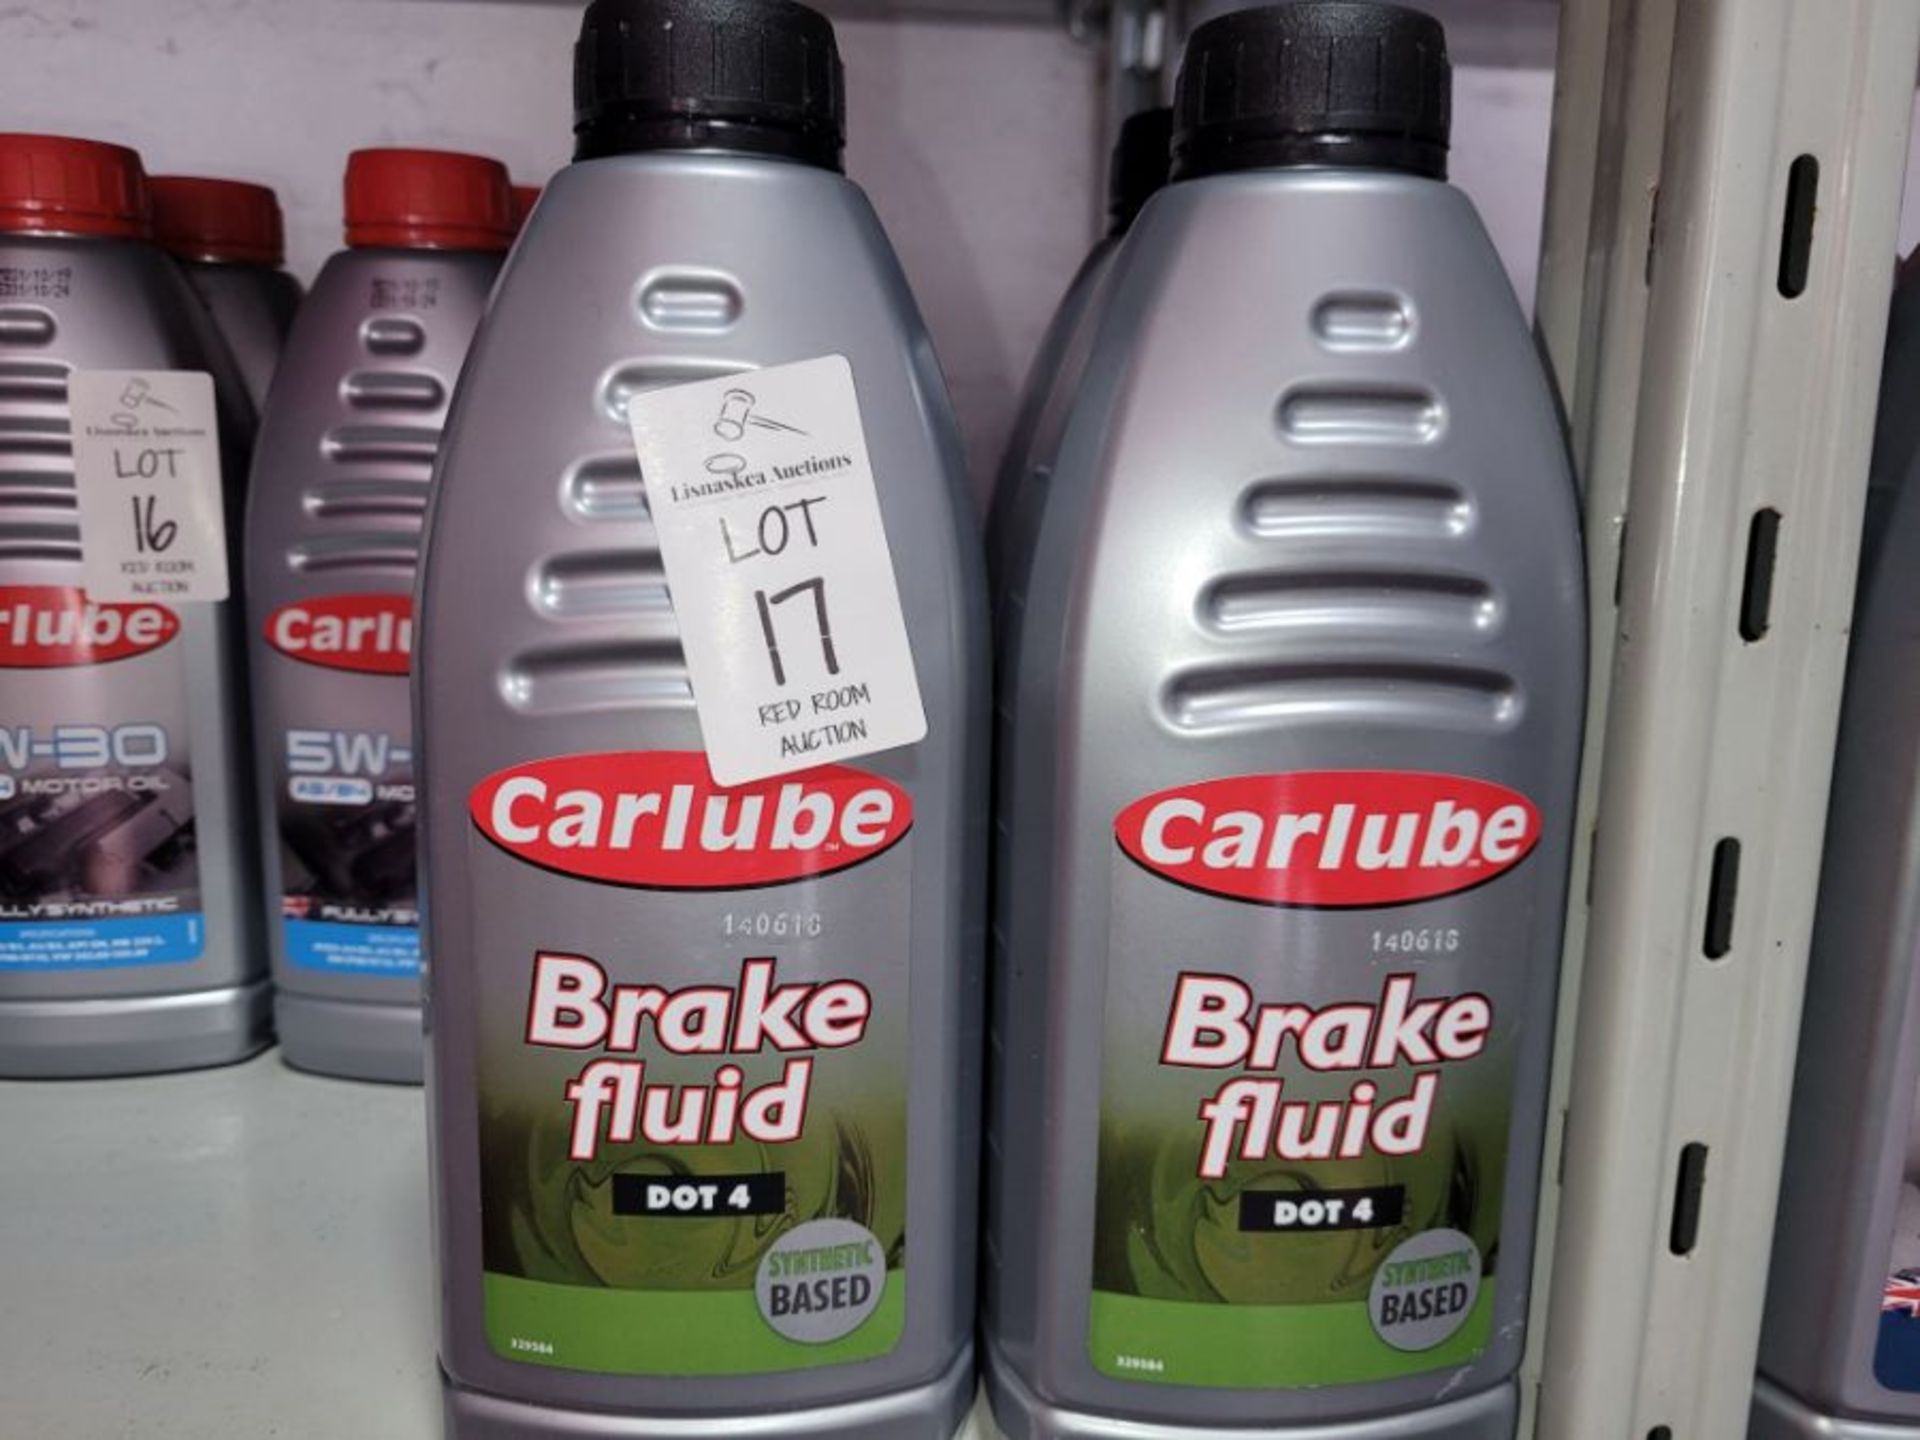 3x CARLUBE BRAKE FLUID DOT 4 SYNTHETIC BASED 1L - Image 3 of 3